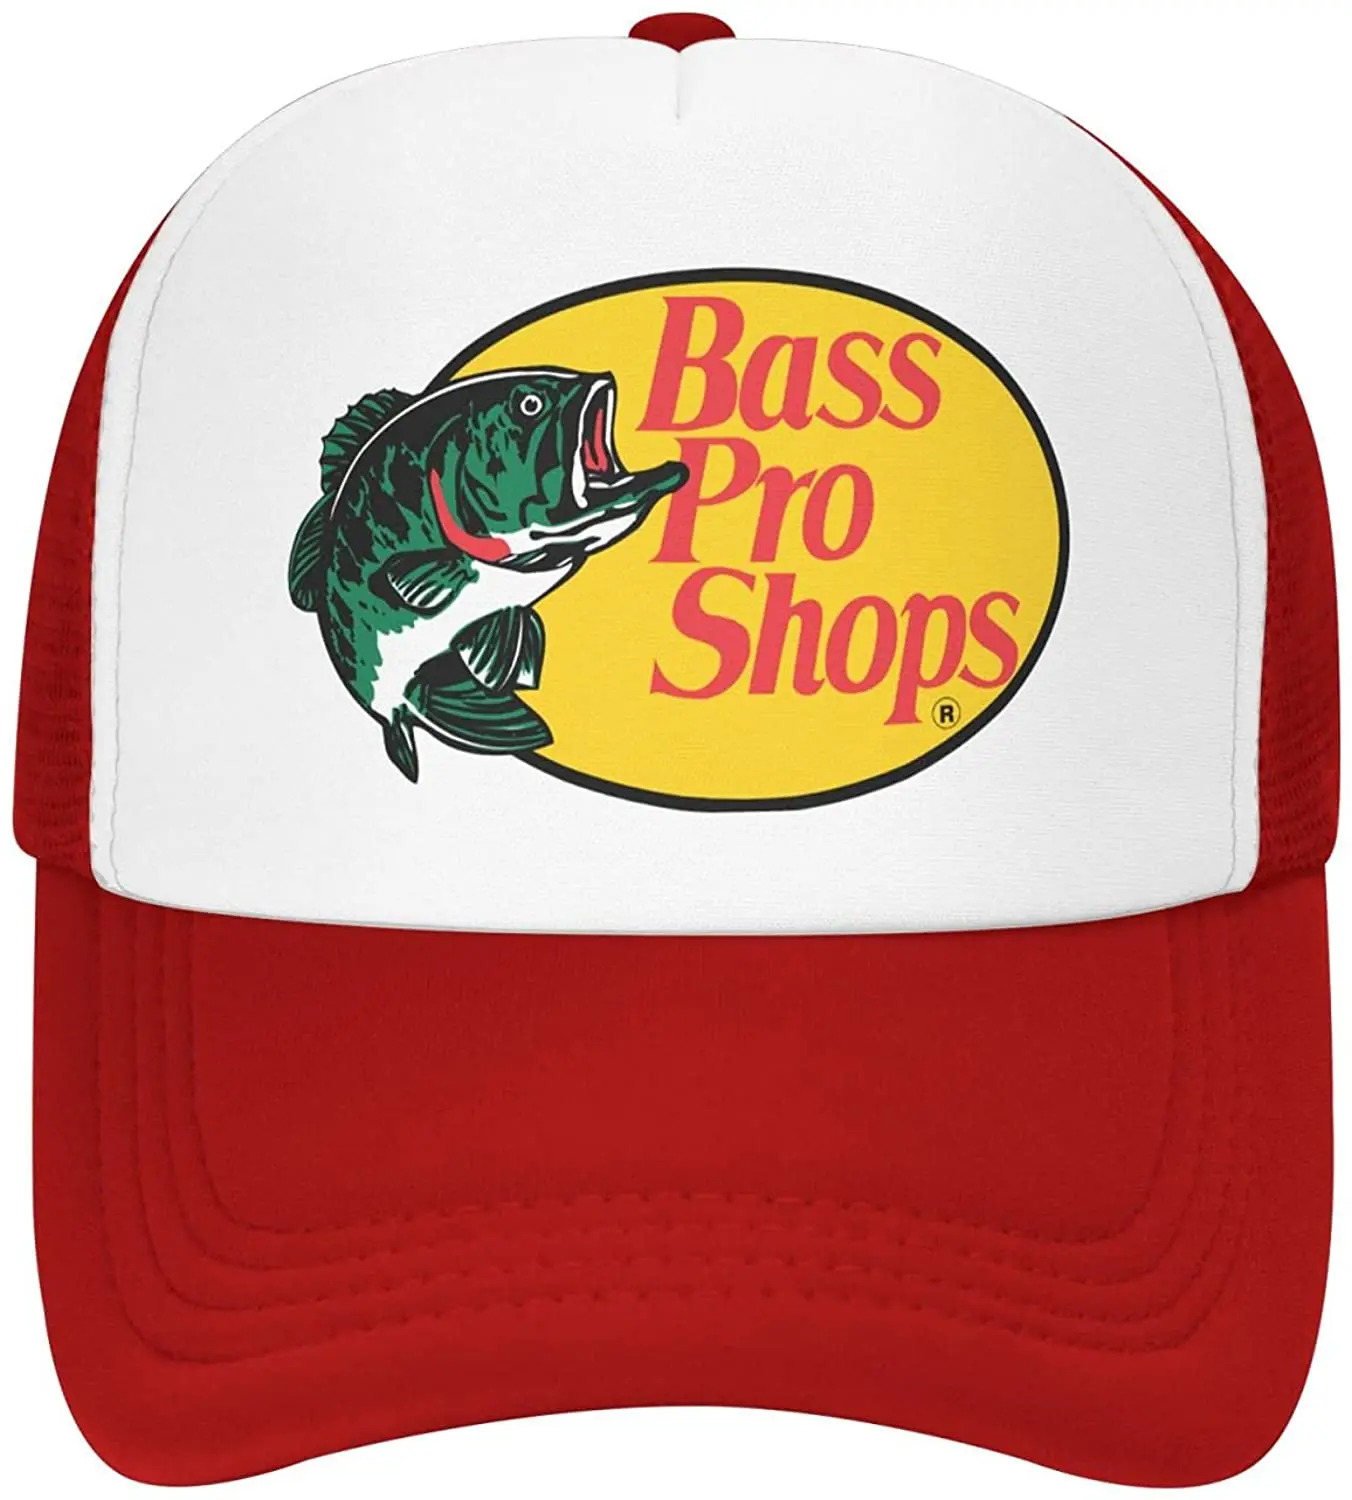 

BassproShops Trucker hat mesh Cap one Size fits All Snapback Closure Great for Hunting, Fishing, Travel, Mountaineering